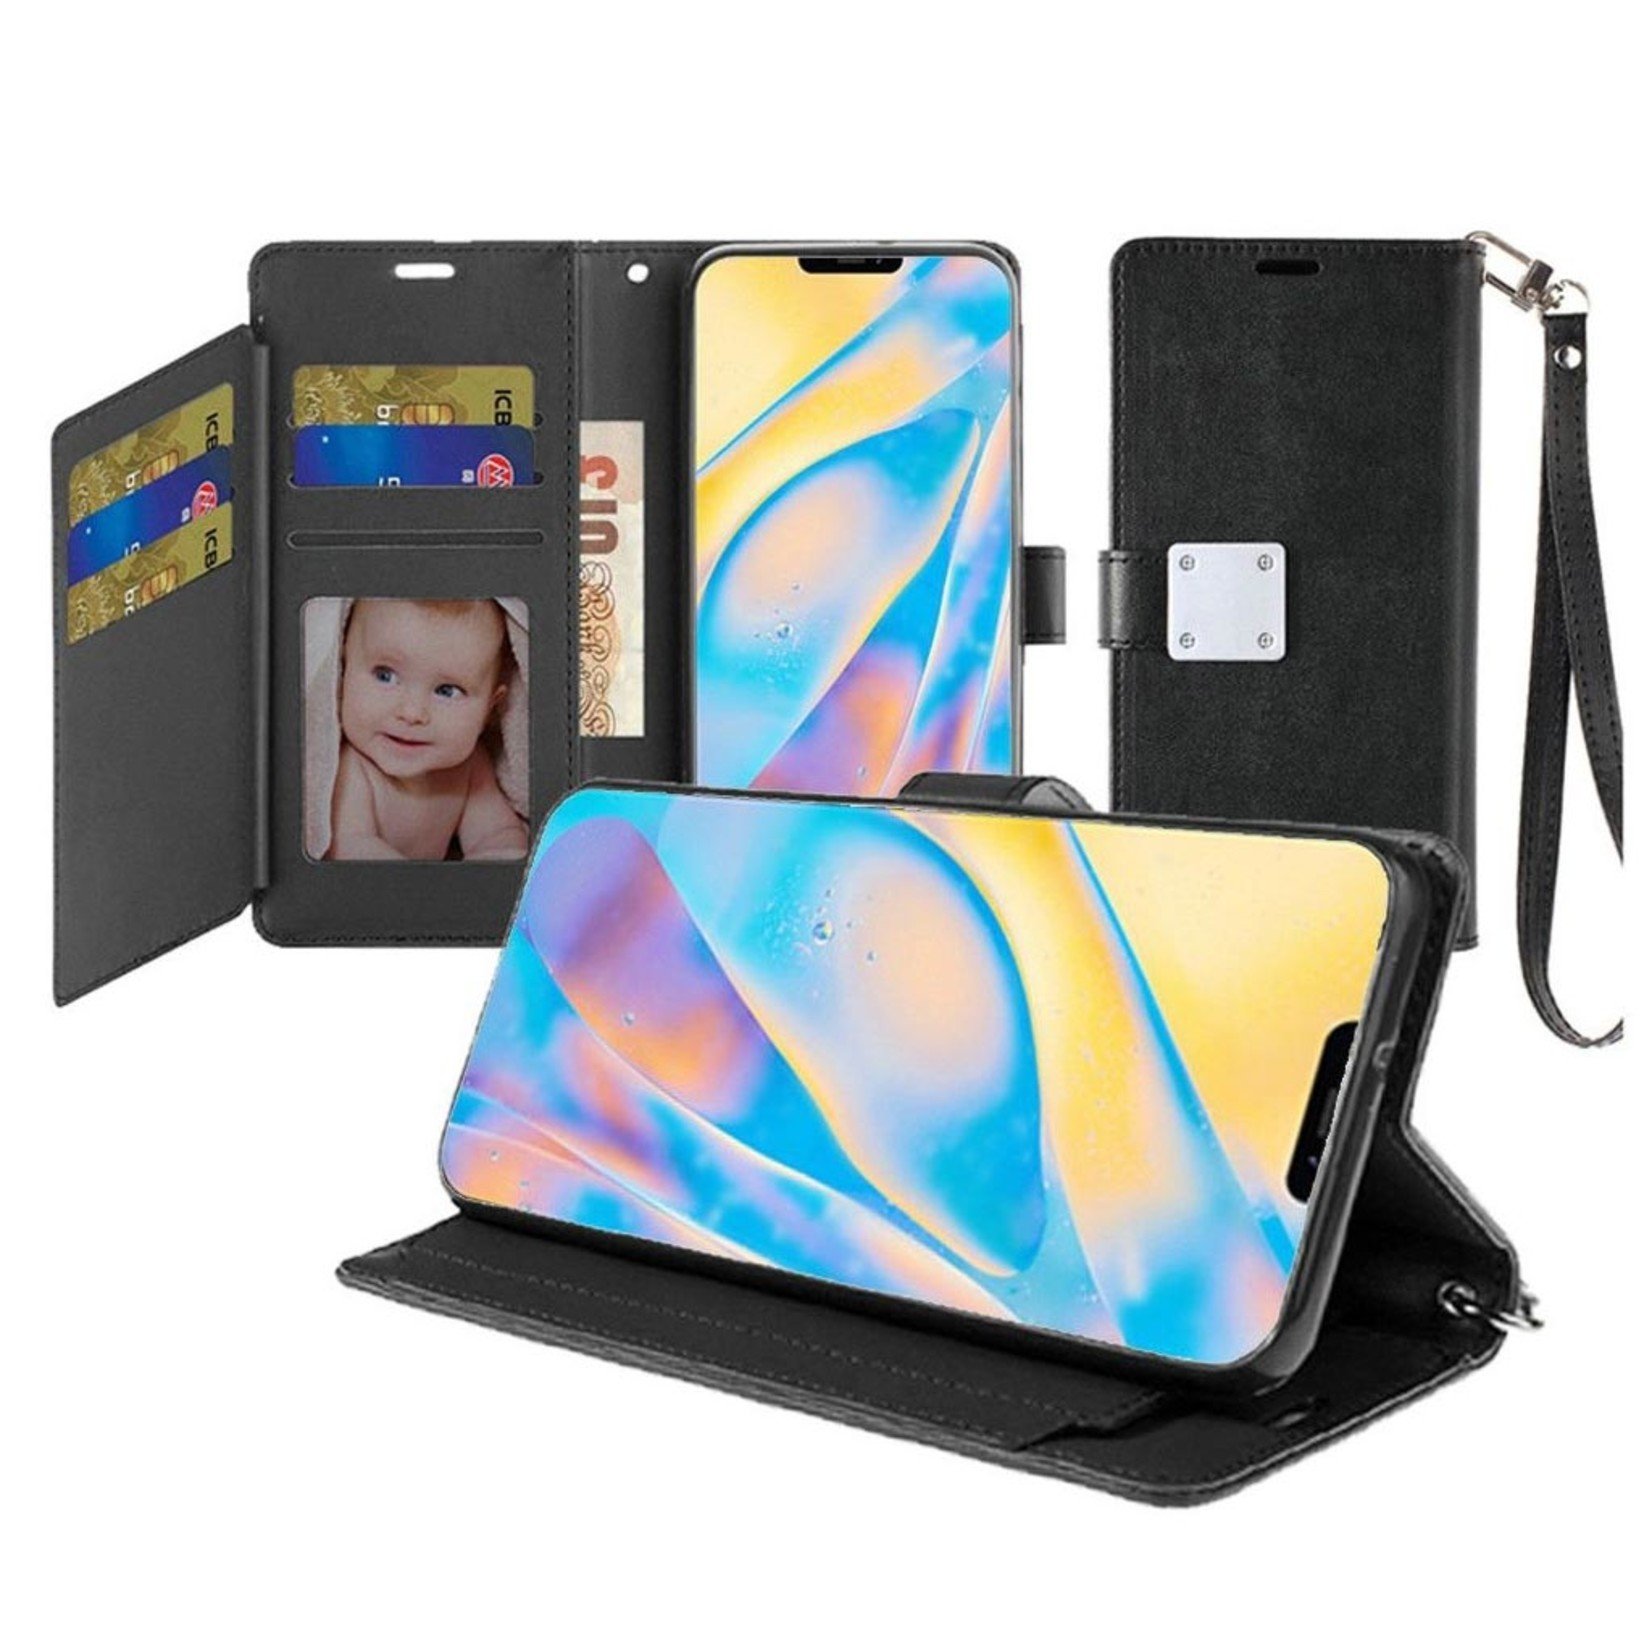 Hybrid PU Leather Metallic Flip Cover Wallet Case with Credit Card Slots for iPhone 12 / 12 Pro